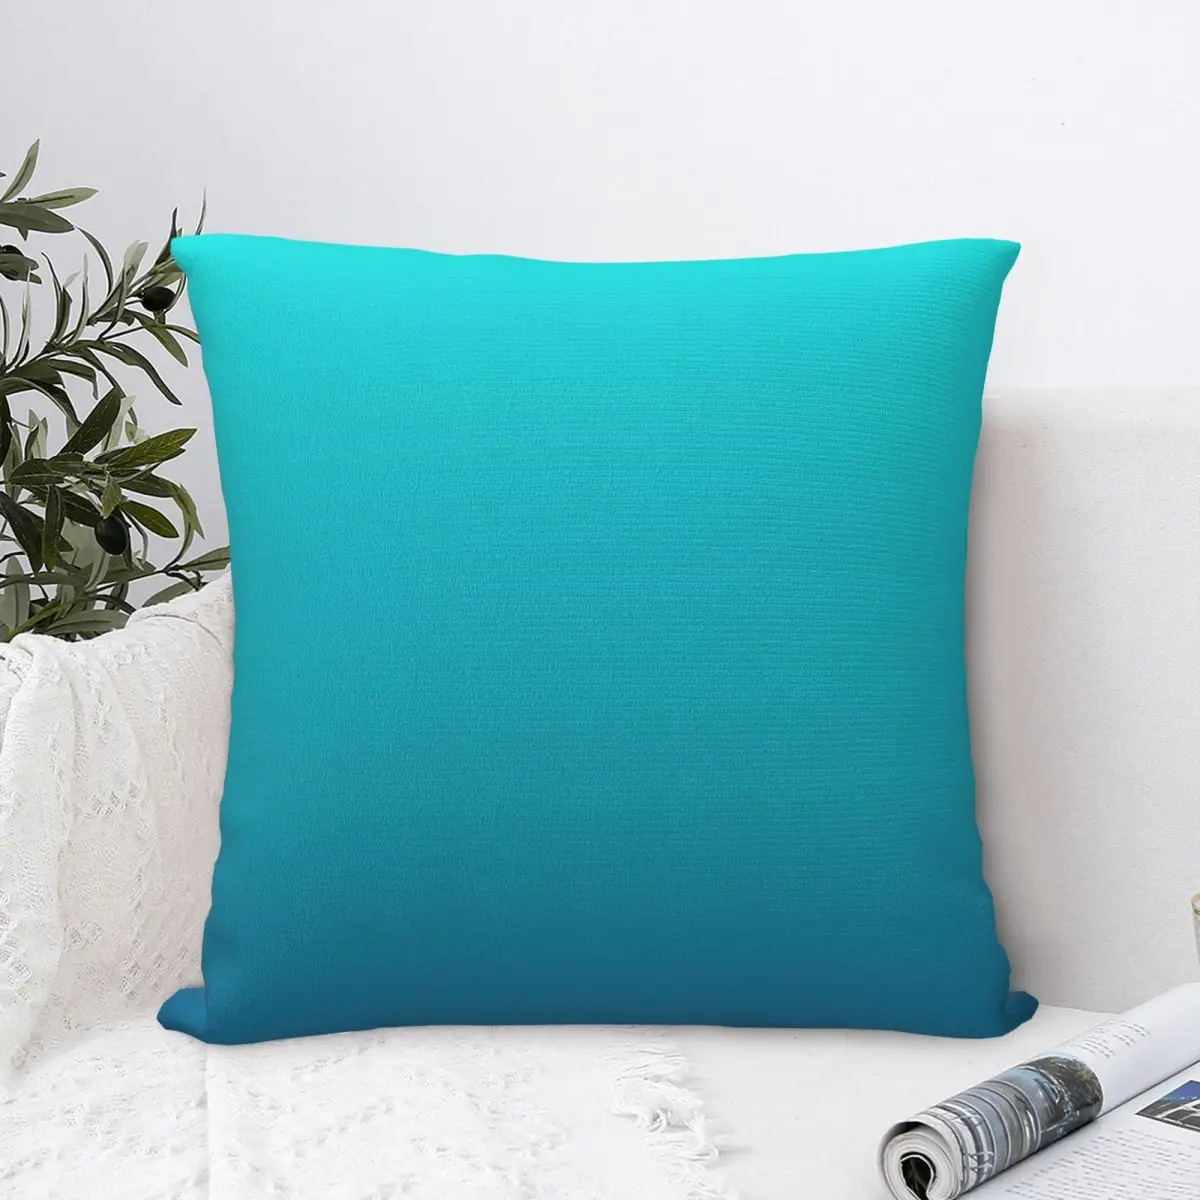 

Summer Beach Chic Abstract Teal Blue Turquoise Ombre Throw Pillow Case Solid Colour Art Cushion For Home Sofa Hug Pillowcase